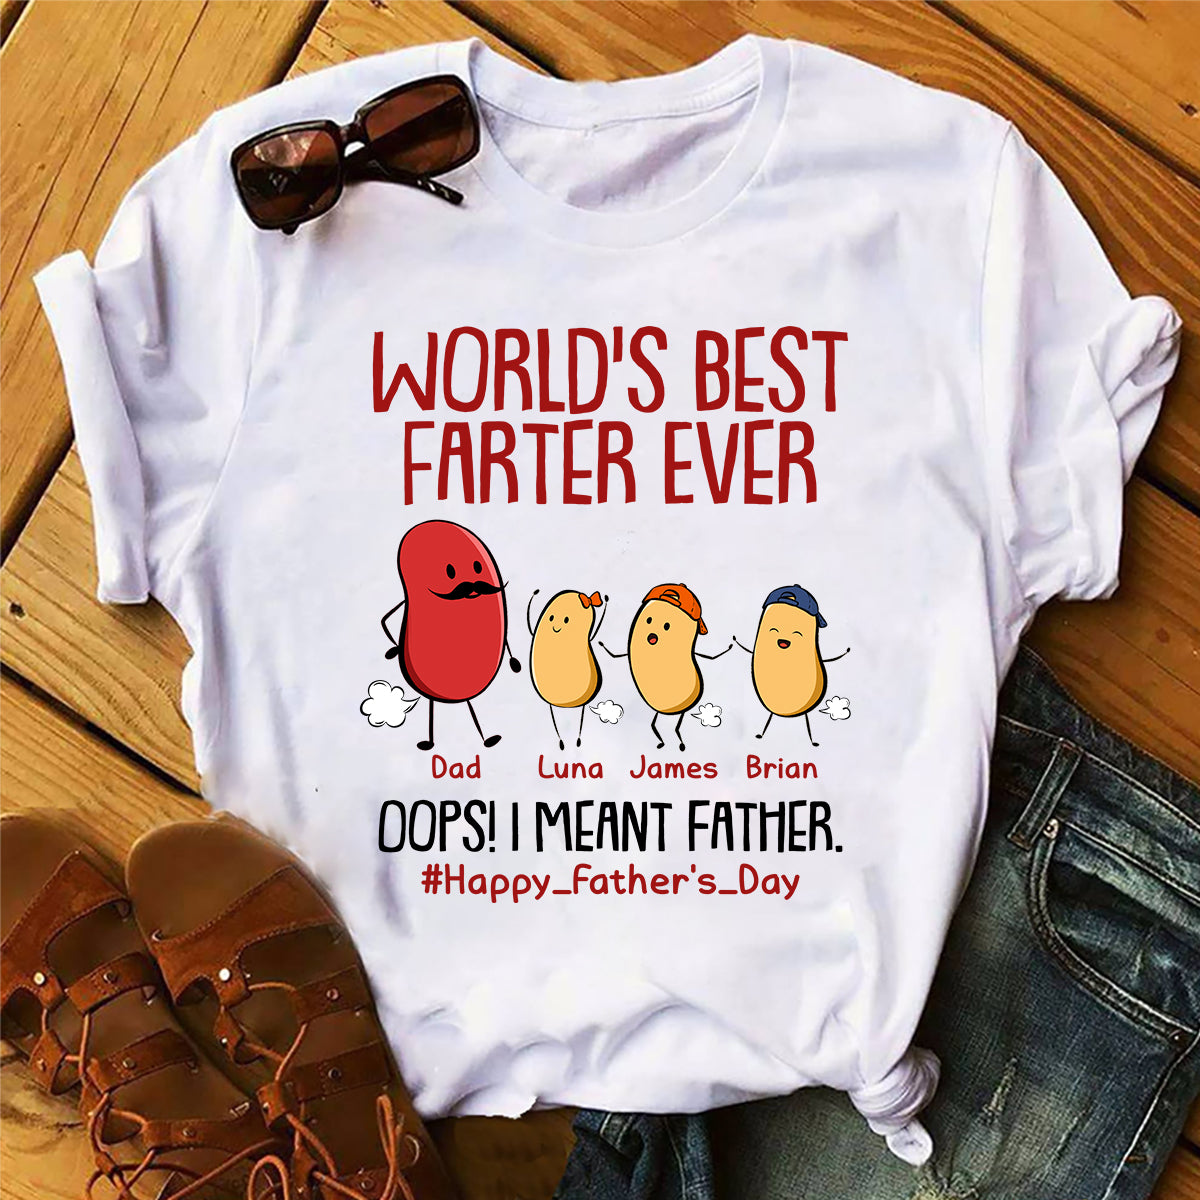 Best Farter Ever - Personalized Father T-shirt and Hoodie